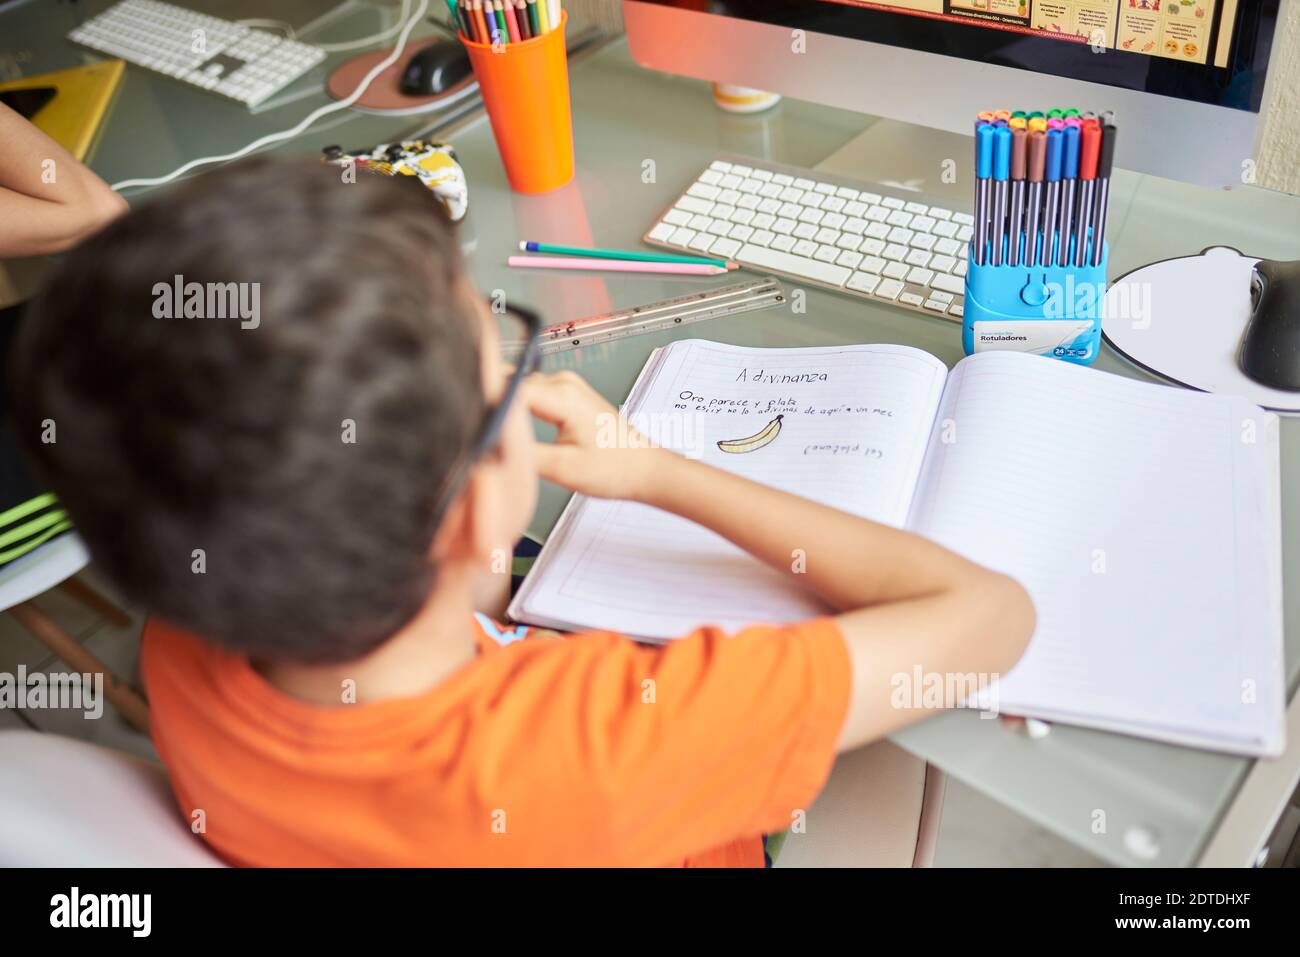 Boys (8-9) learning at home desk with notebook during Covid-19 lockdown Stock Photo